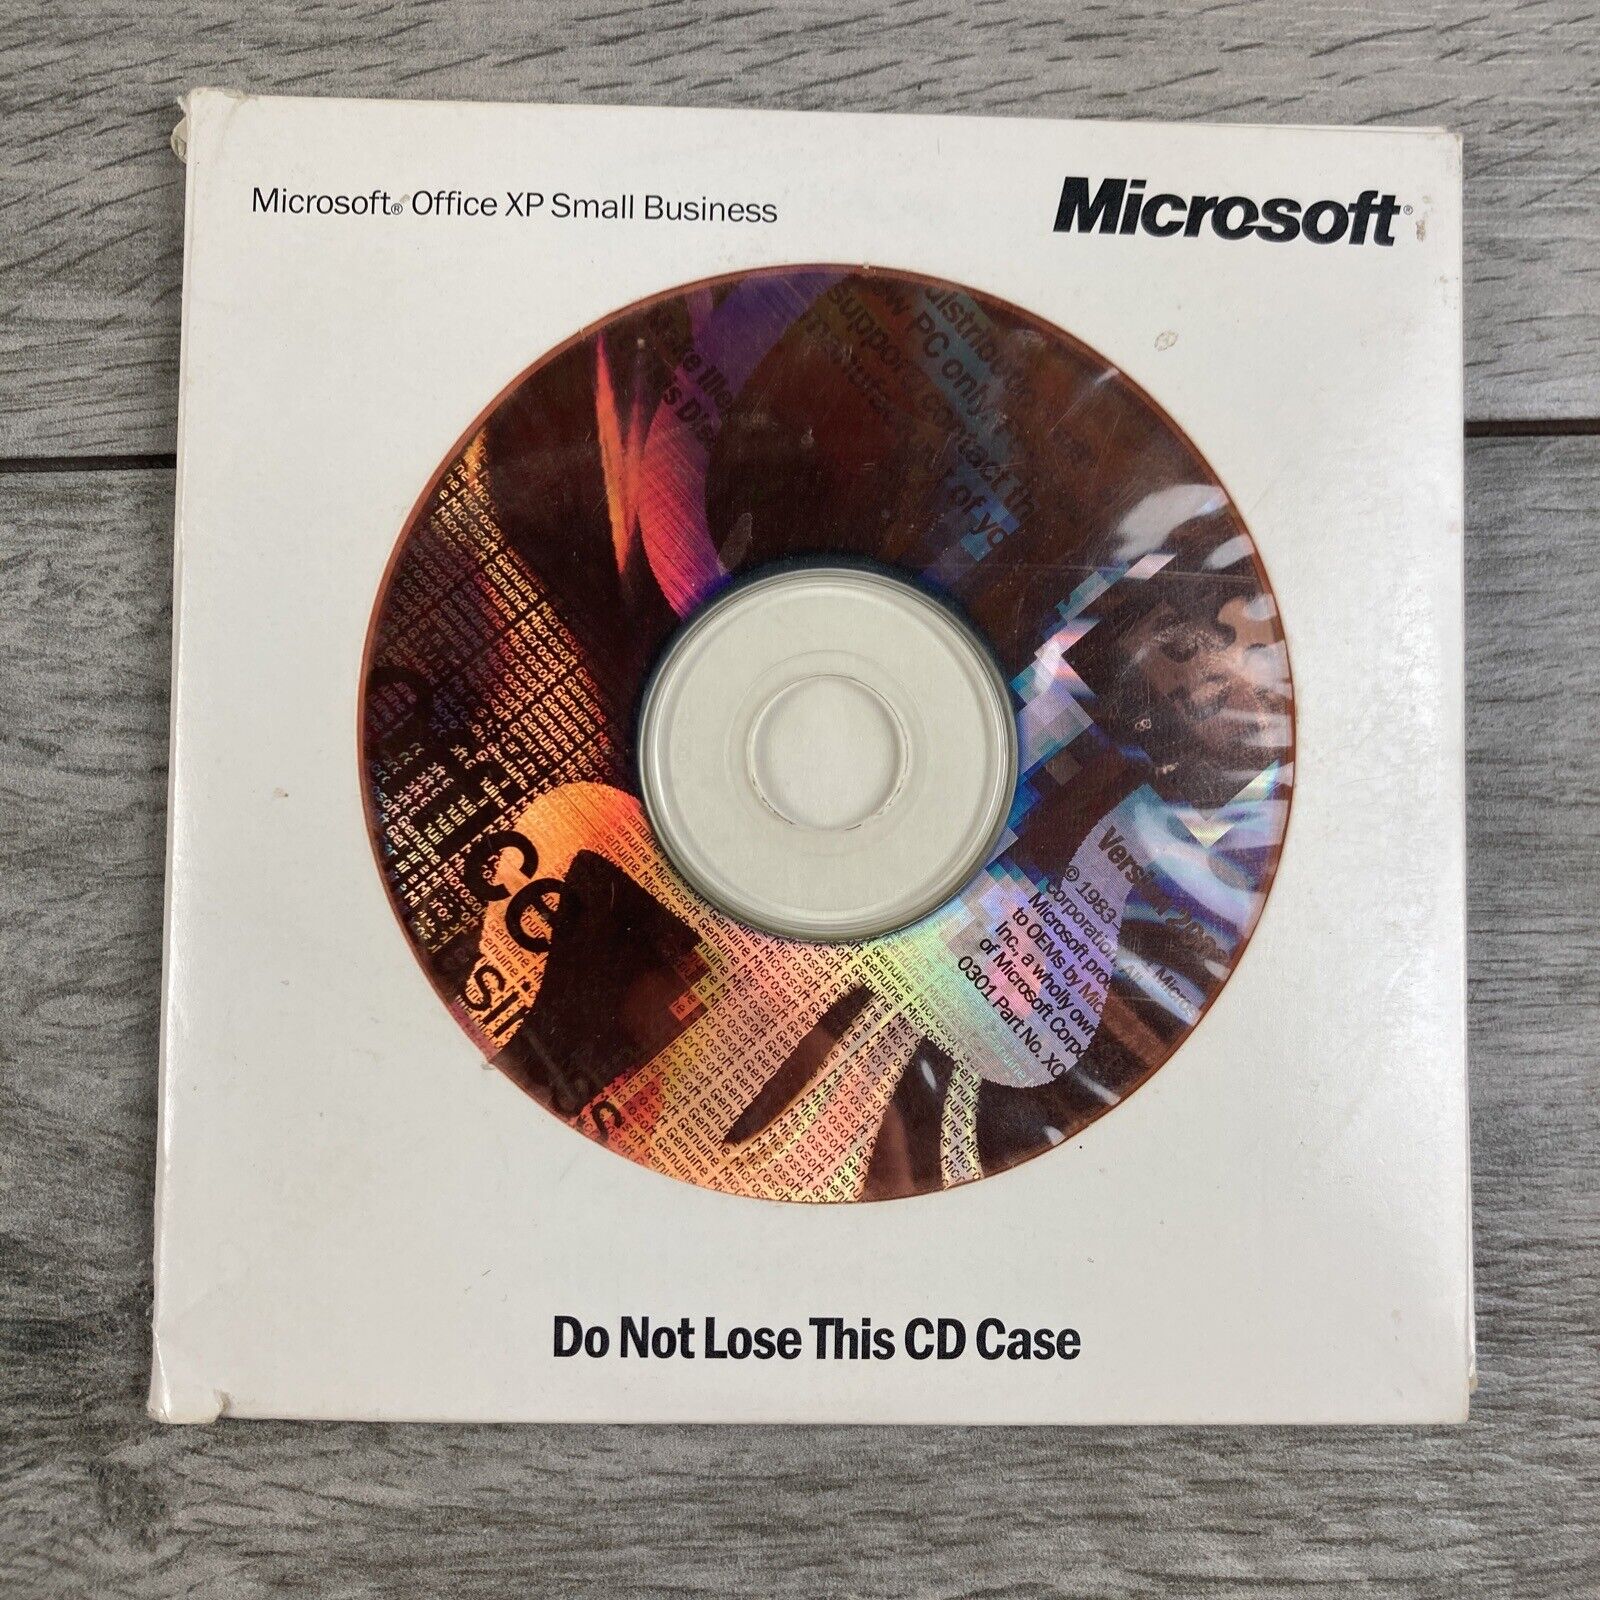 Microsoft Office XP 2002 SBE Dell Small Business Edition w/ Product Key 2 Discs